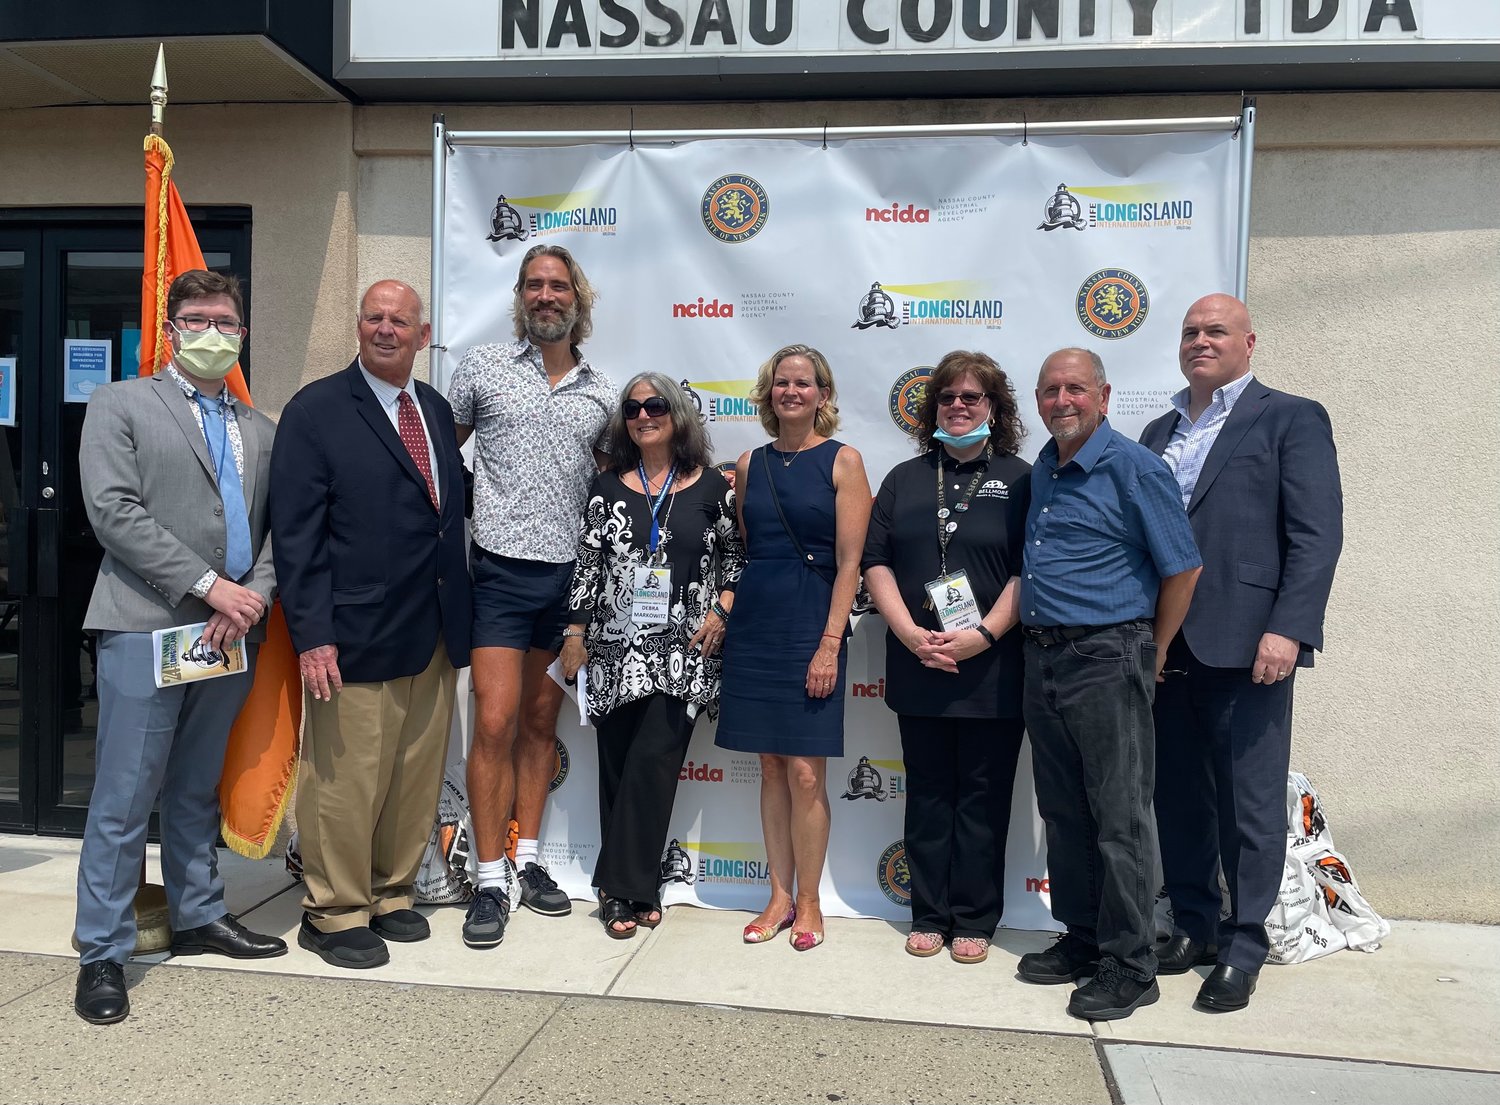 County Executive Laura Curran, center, kicked off the Long Island International Film Expo on Tuesday with, from left, Jared Fishedick, Richard Kessel, Lukas Hassel, Debra Markowitz, Bellmore Movies owners Anne and Henry Stampfel and Harry Coghlan.